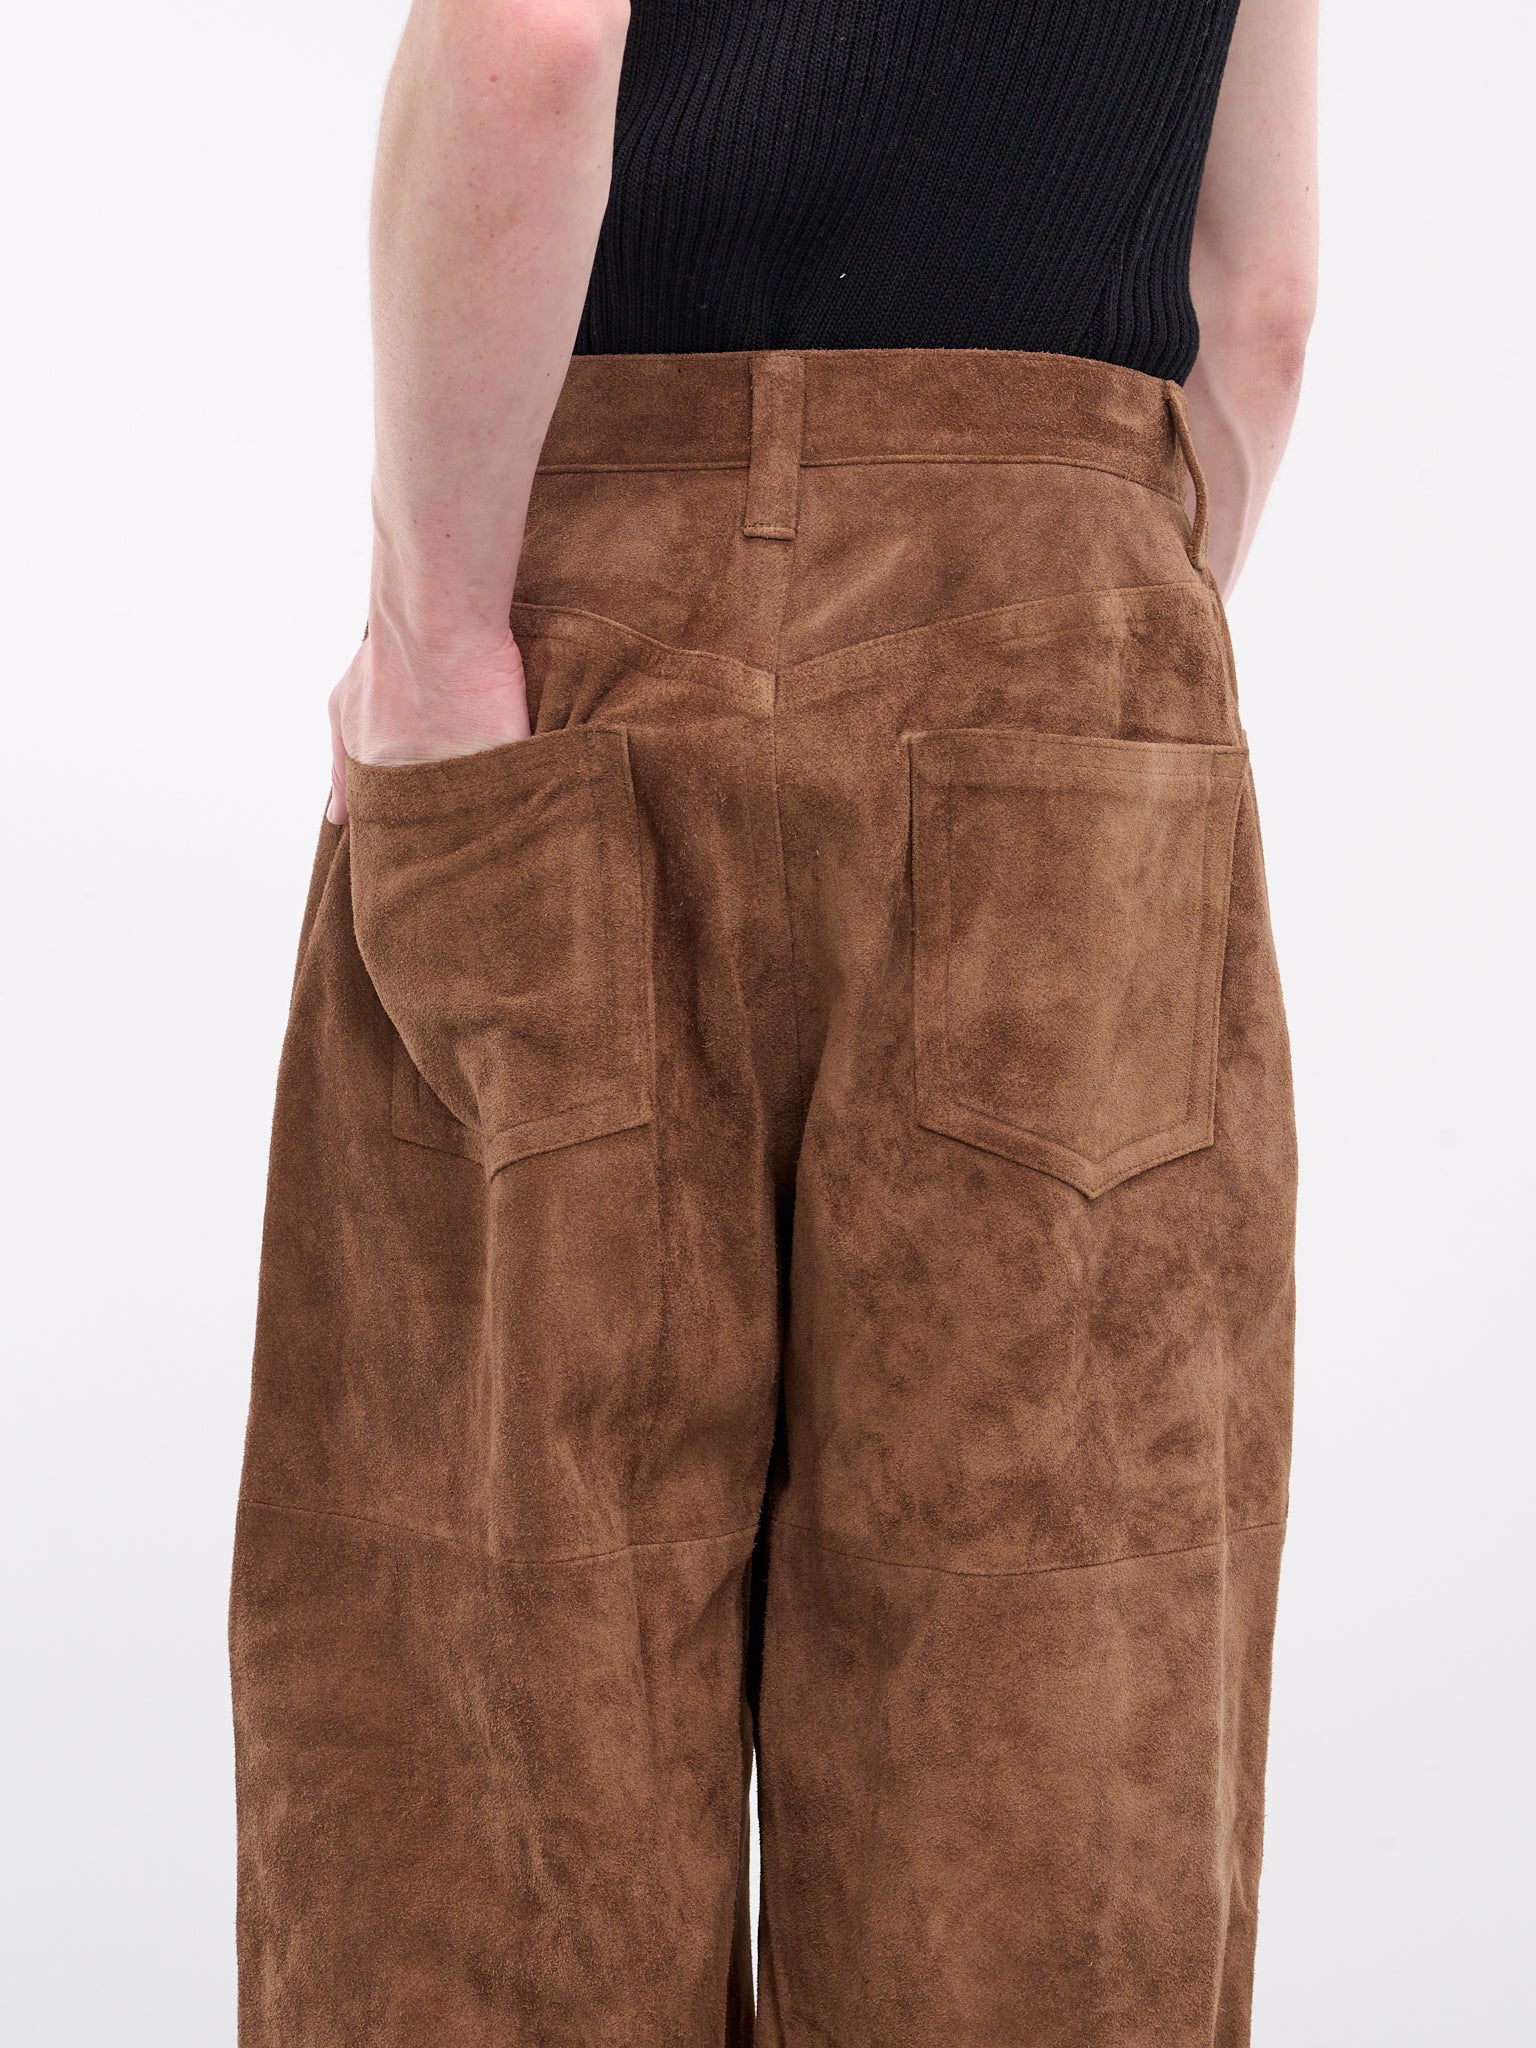 A LEATHER Suede Trousers | H. Lorenzo - detail 1